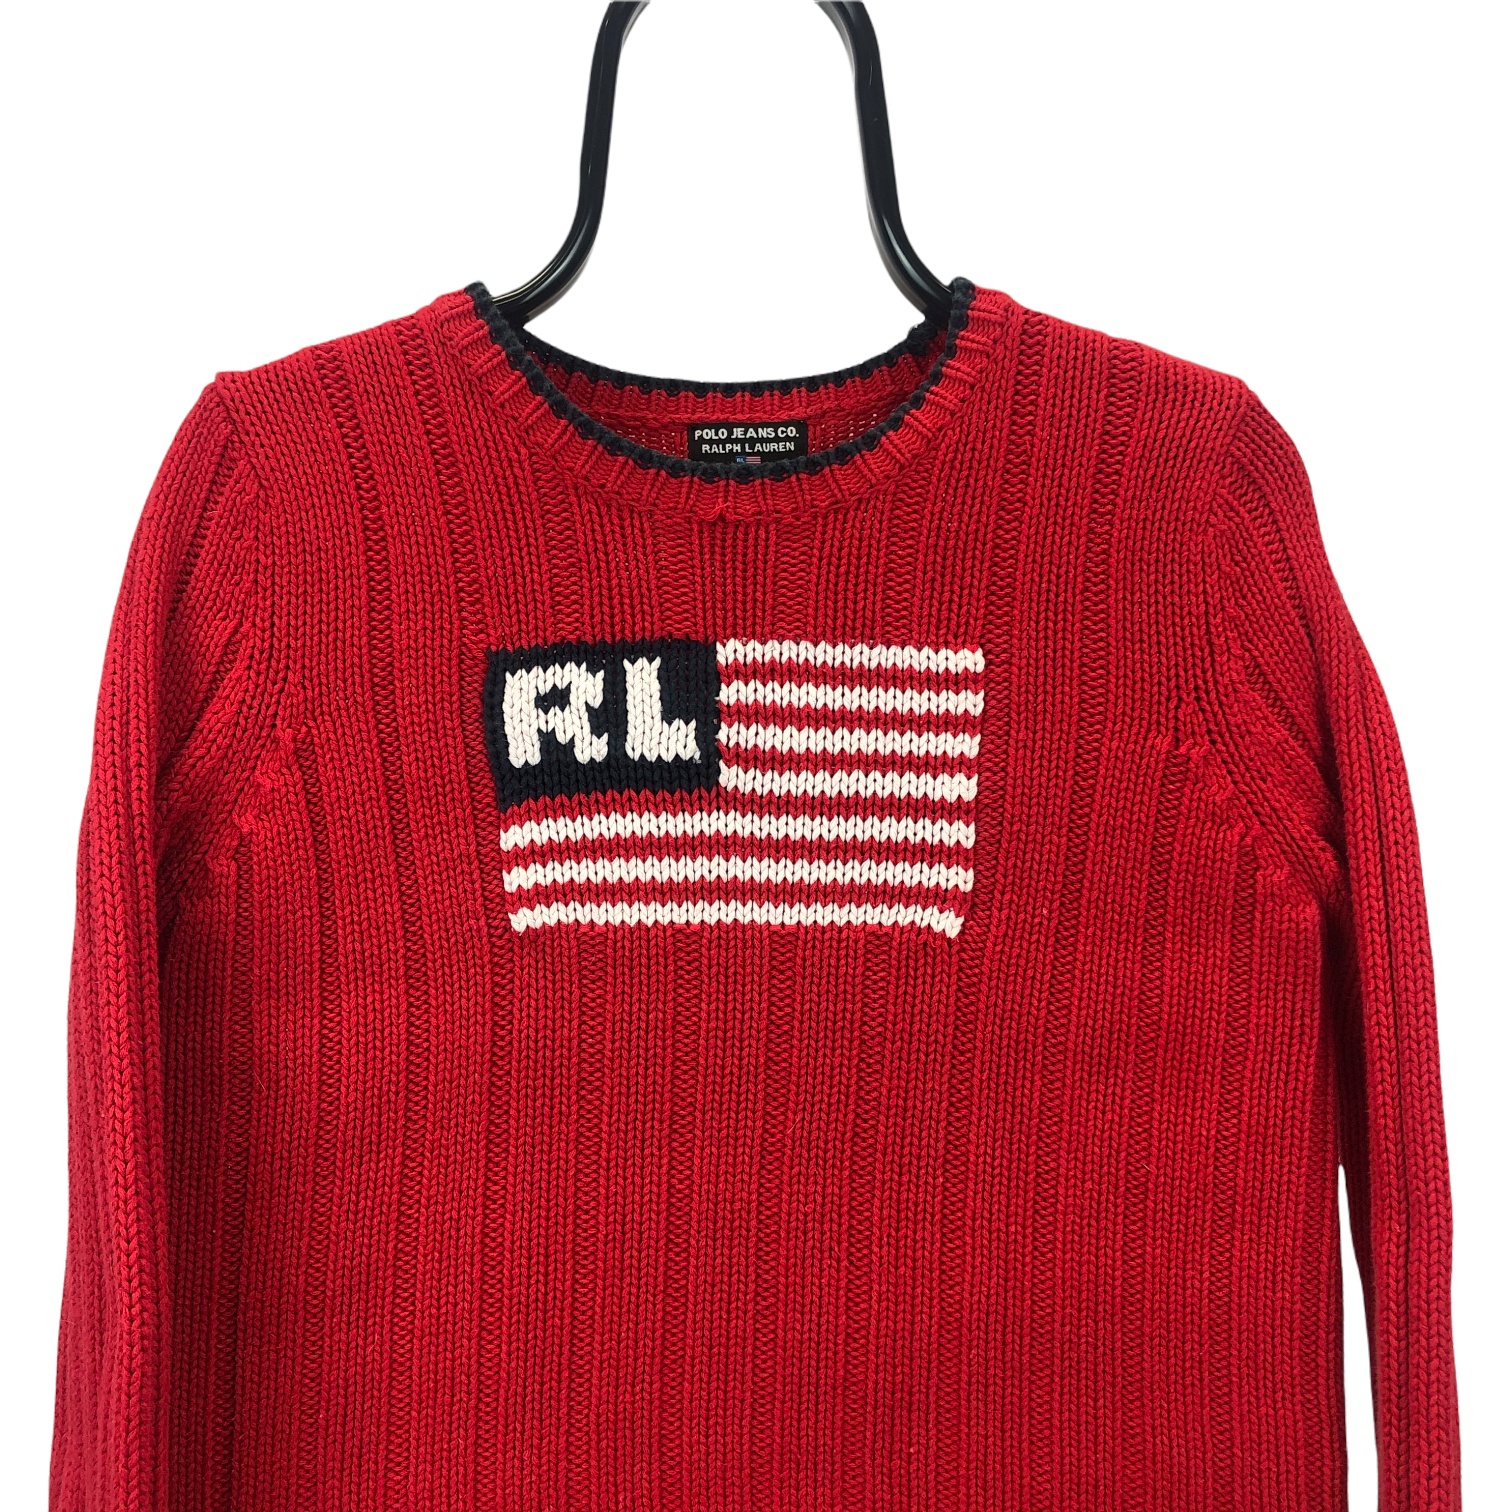 VINTAGE 90S POLO RALPH LAUREN KNITTED SWEATER - MEN'S XS/WOMEN'S SMALL